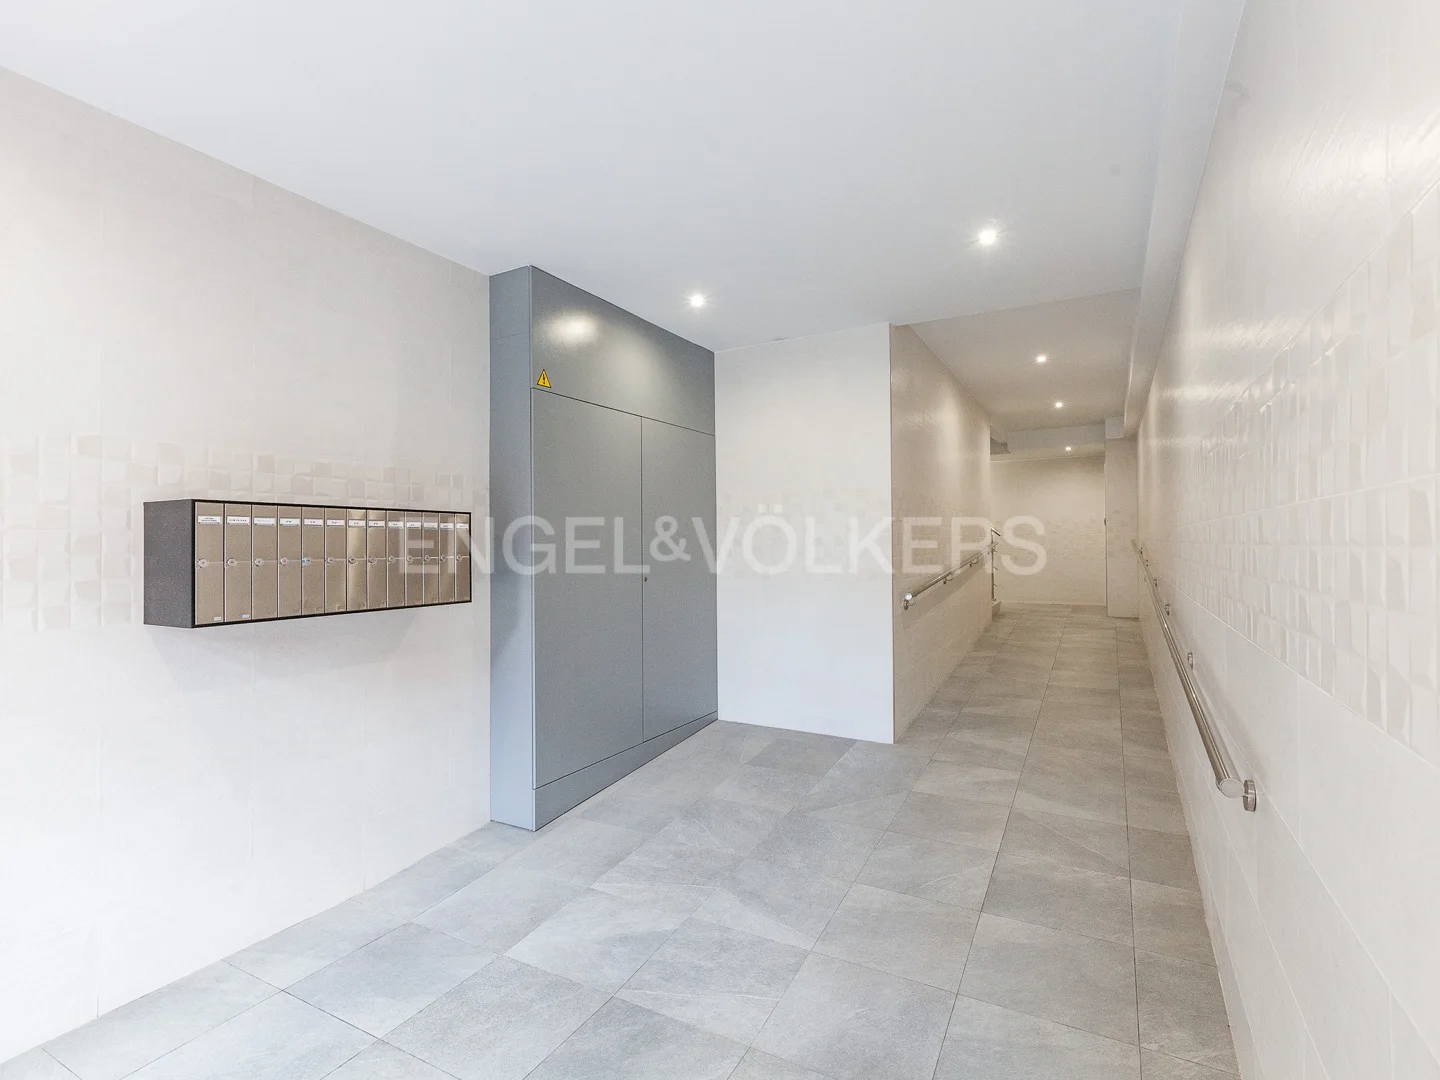 Apartment in the center of Mollet del Valles